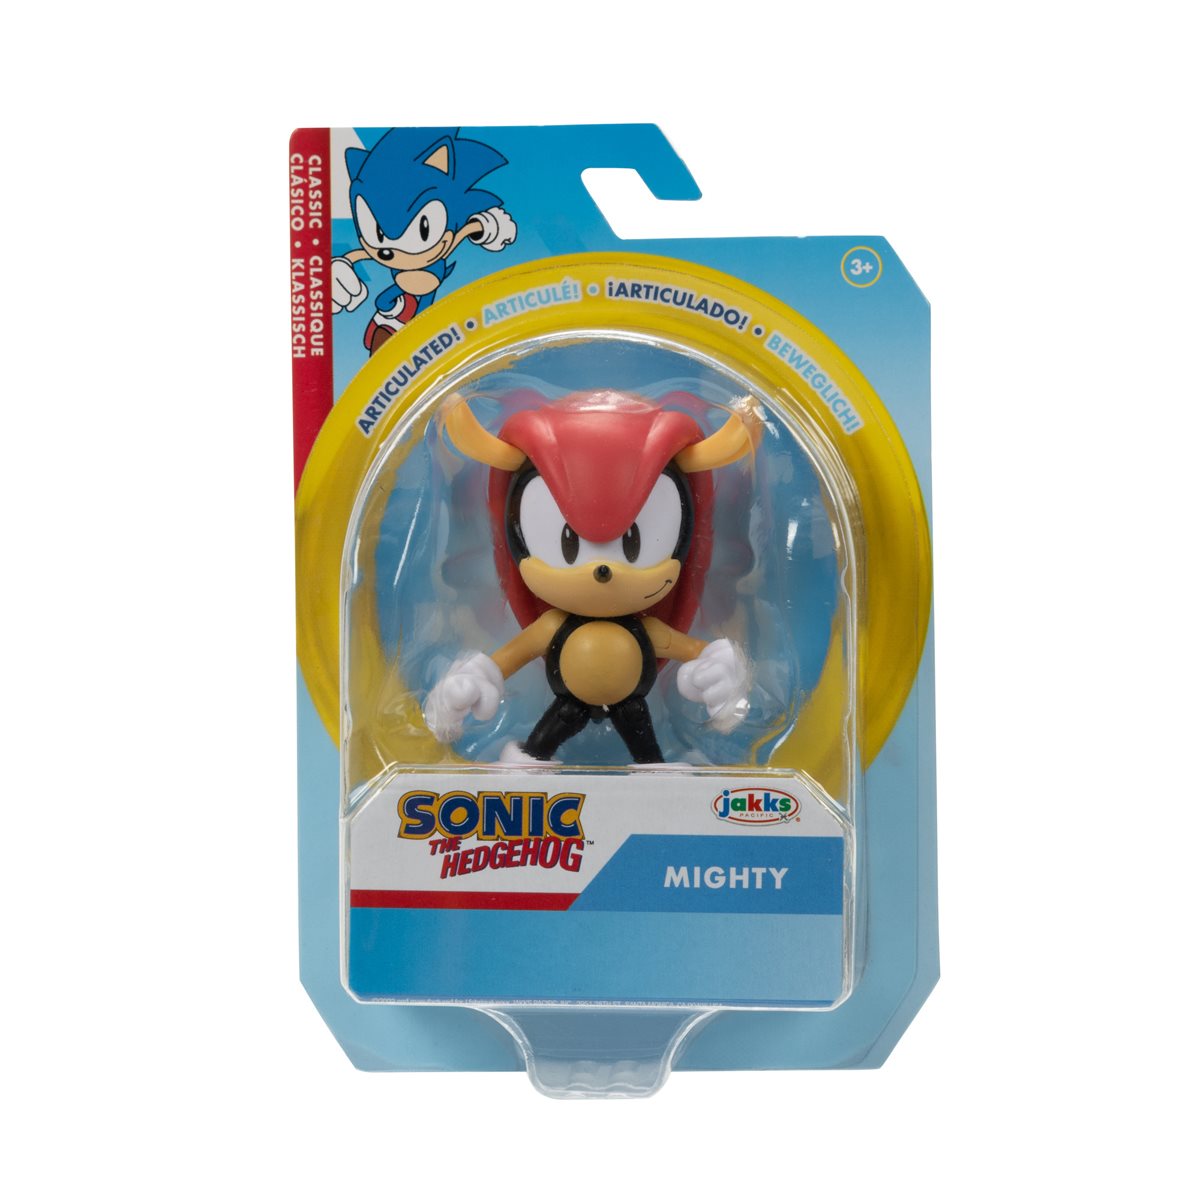 SONIC - FIGURINE COLLECTION ARTICULEE 15 CM